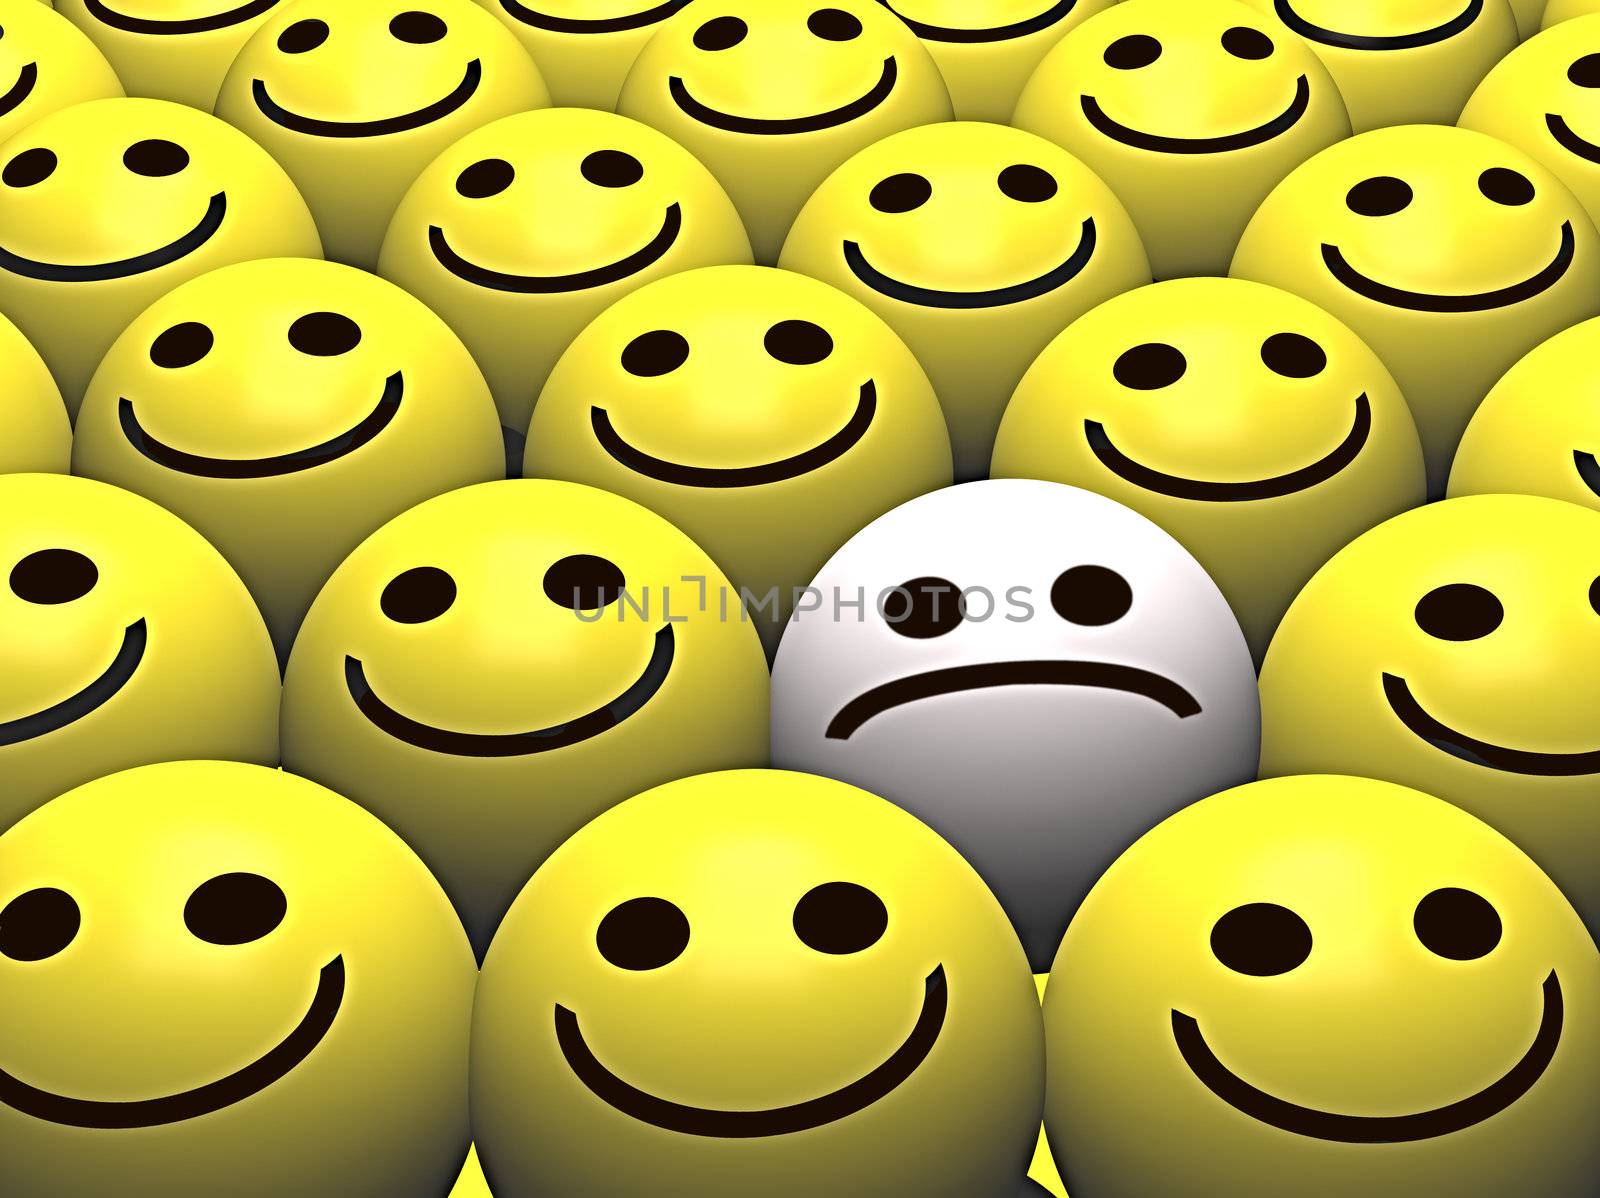 A sad smiley stands out from the crowd of happy smileys